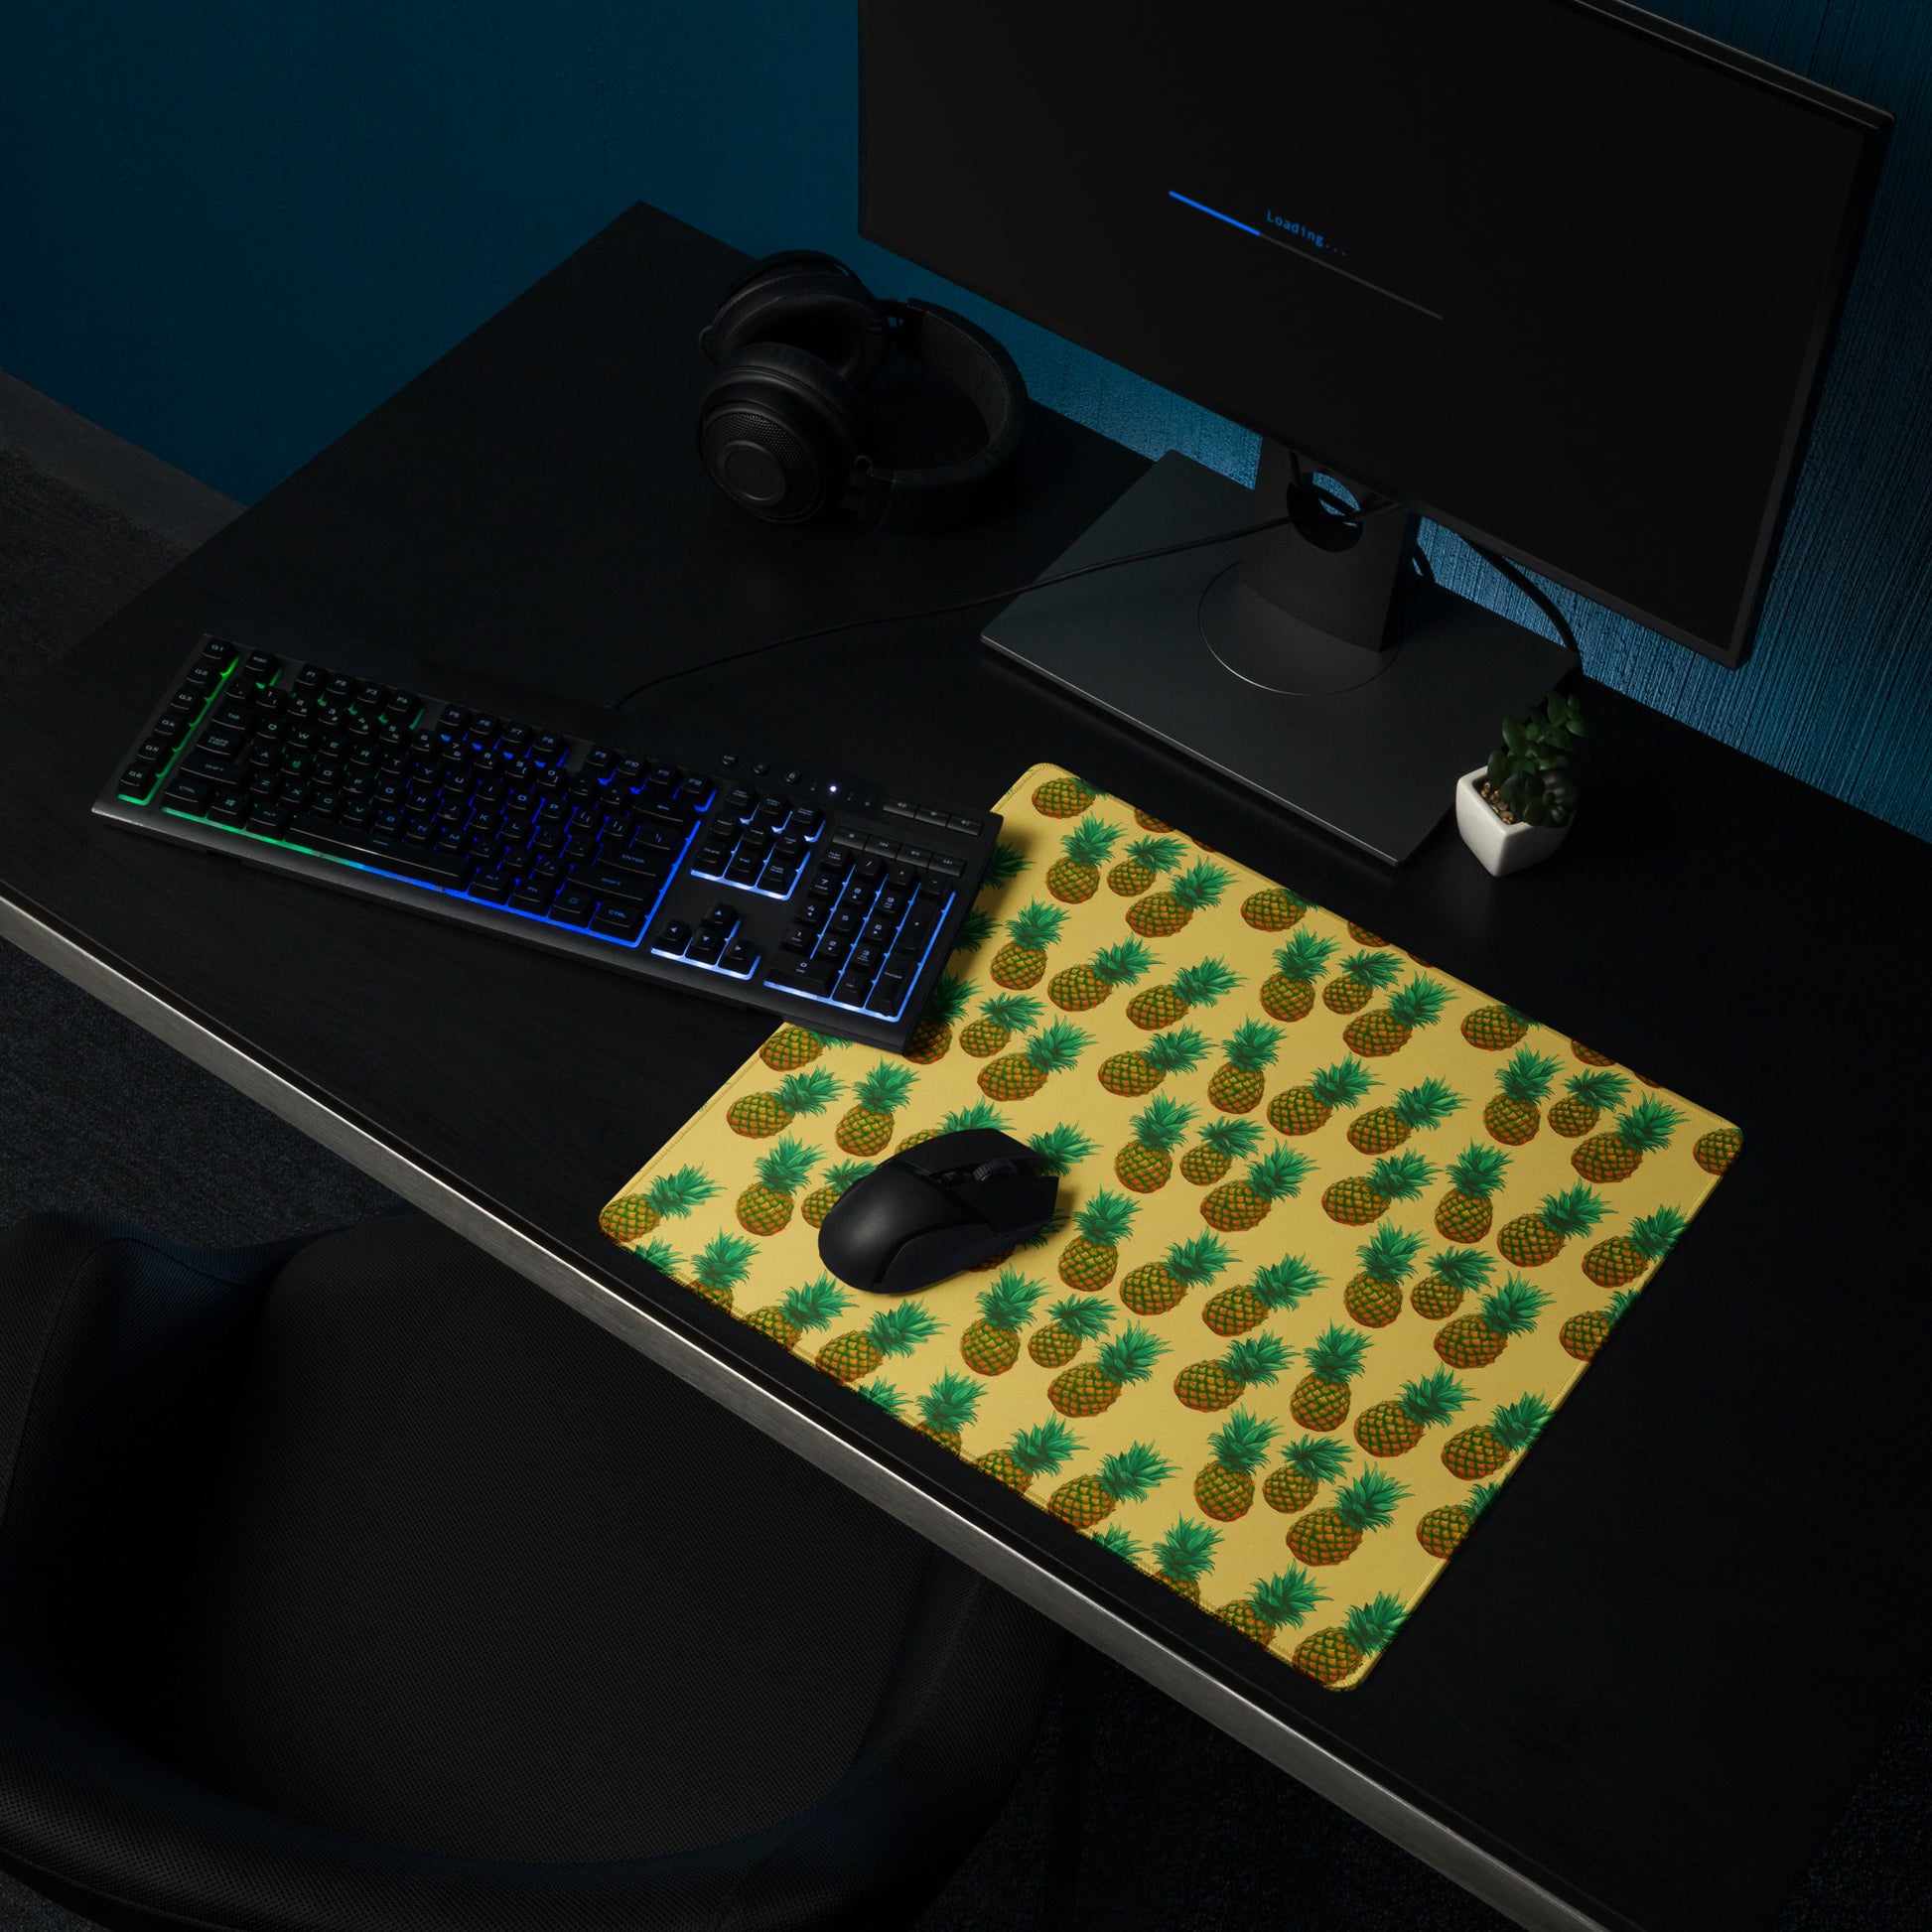 A 18" x 16" desk pad with pineapples all over it shown on a desk setup. Yellow in color.